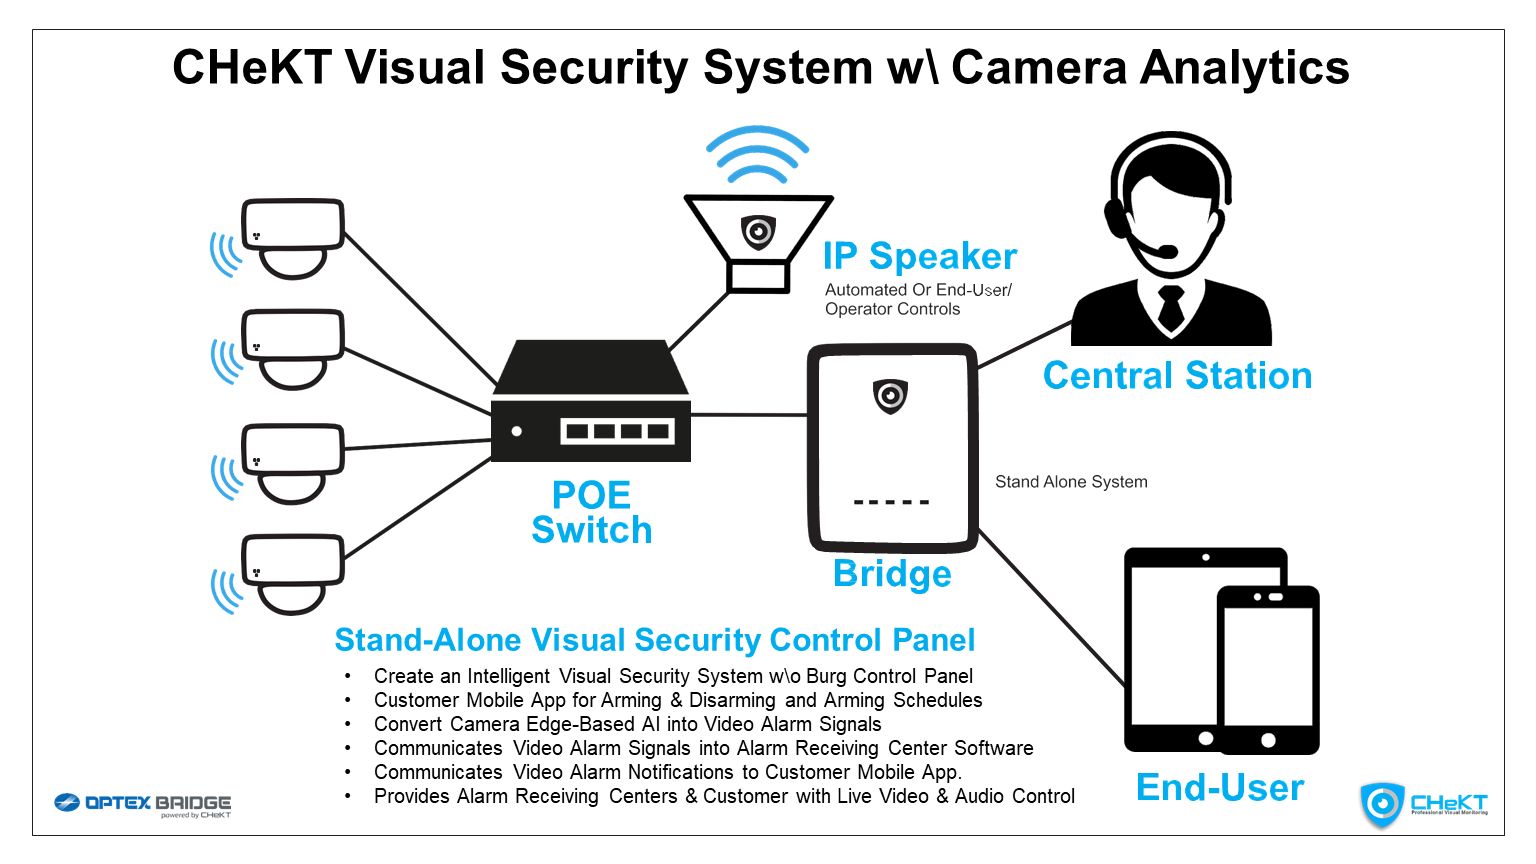 CHeKT Visual Security system